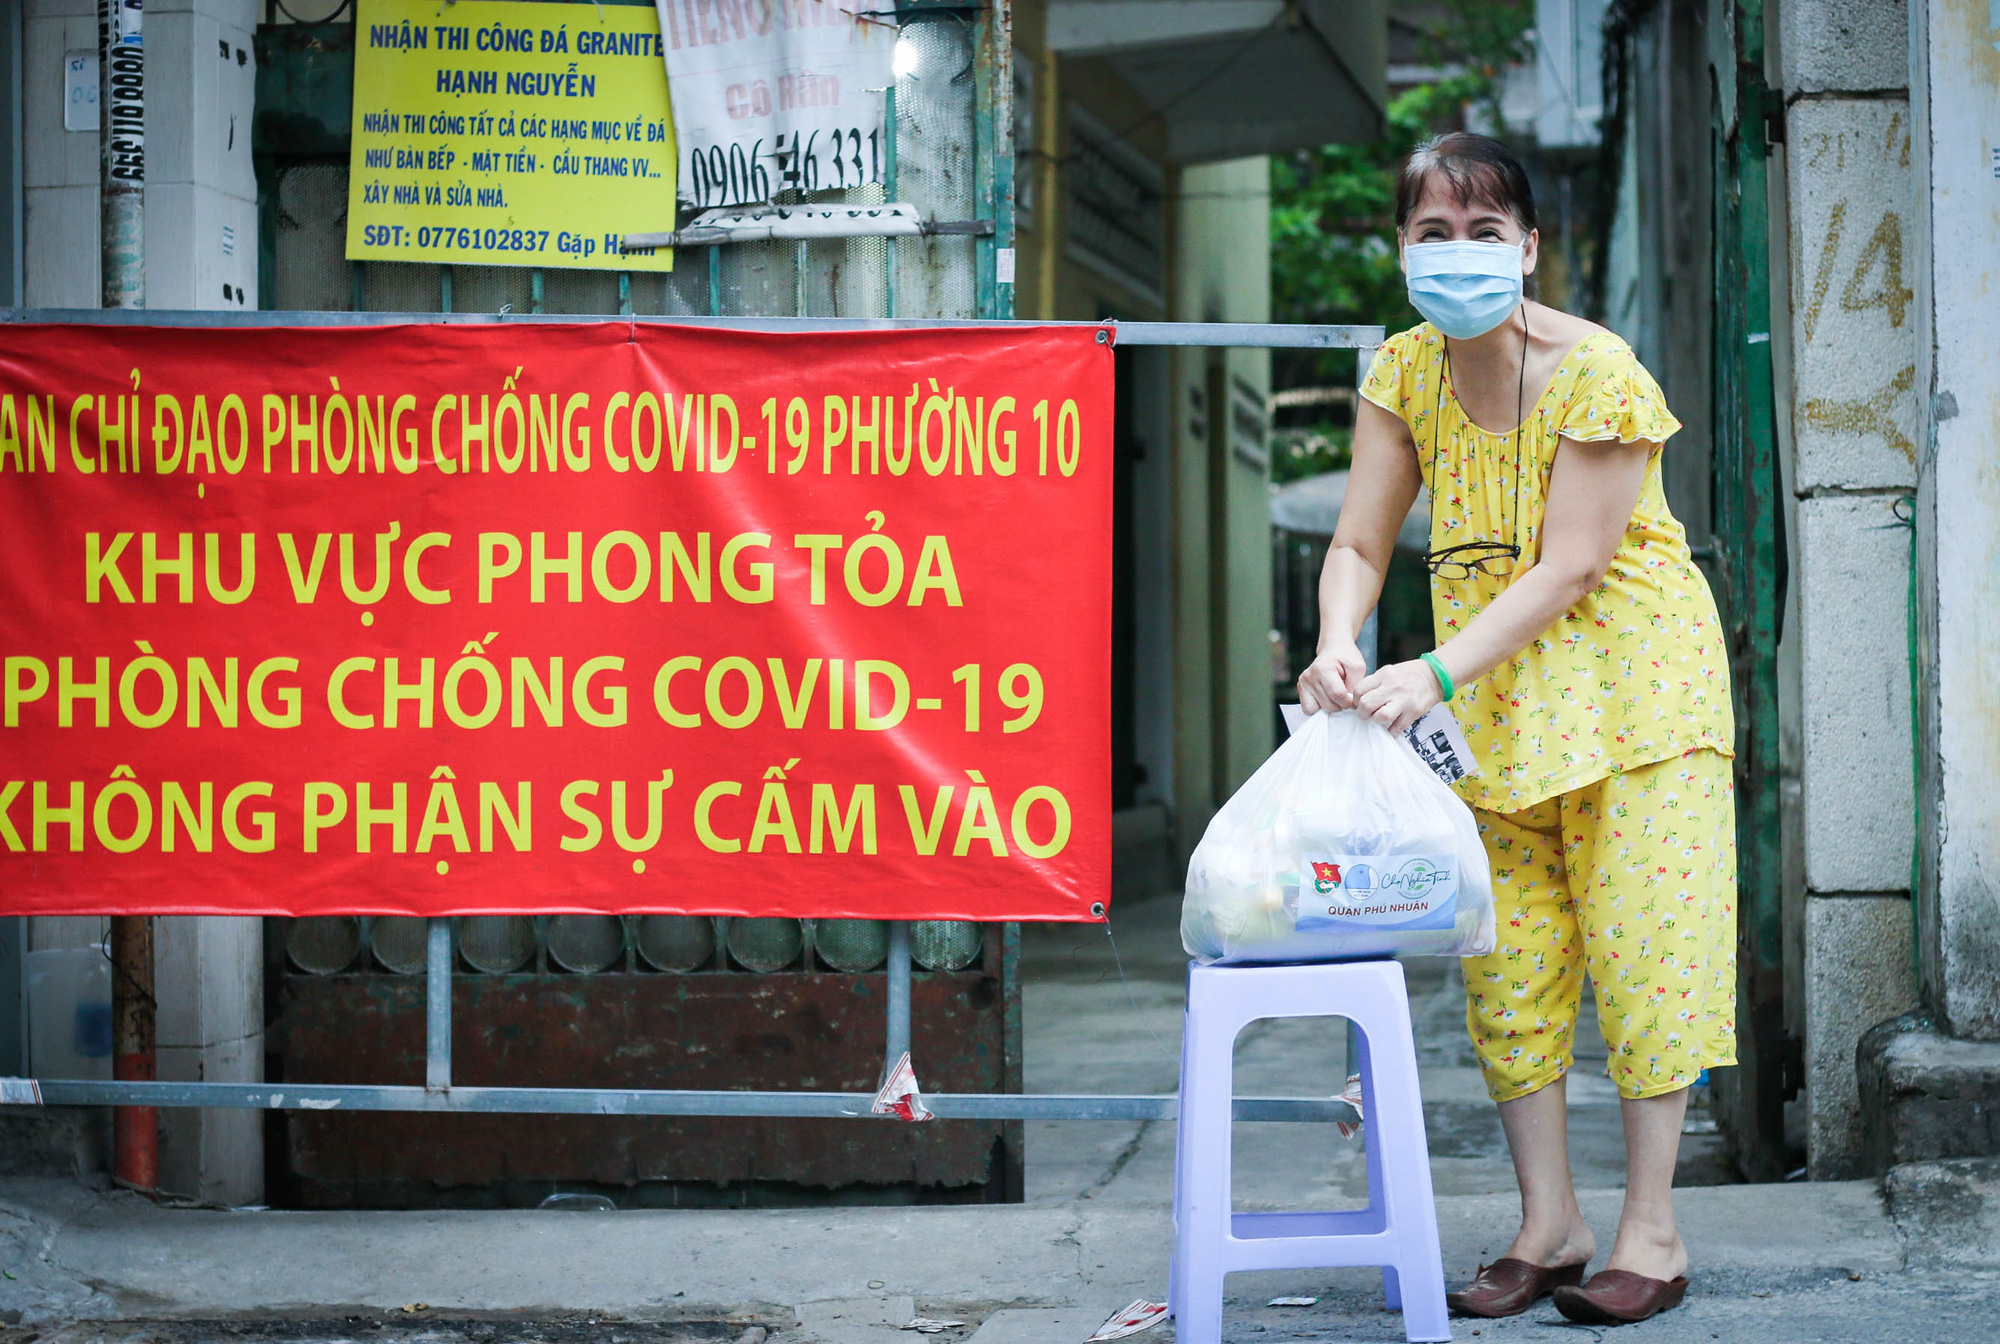 Ho Chi Minh City youths operate online market to assist residents in locked down areas